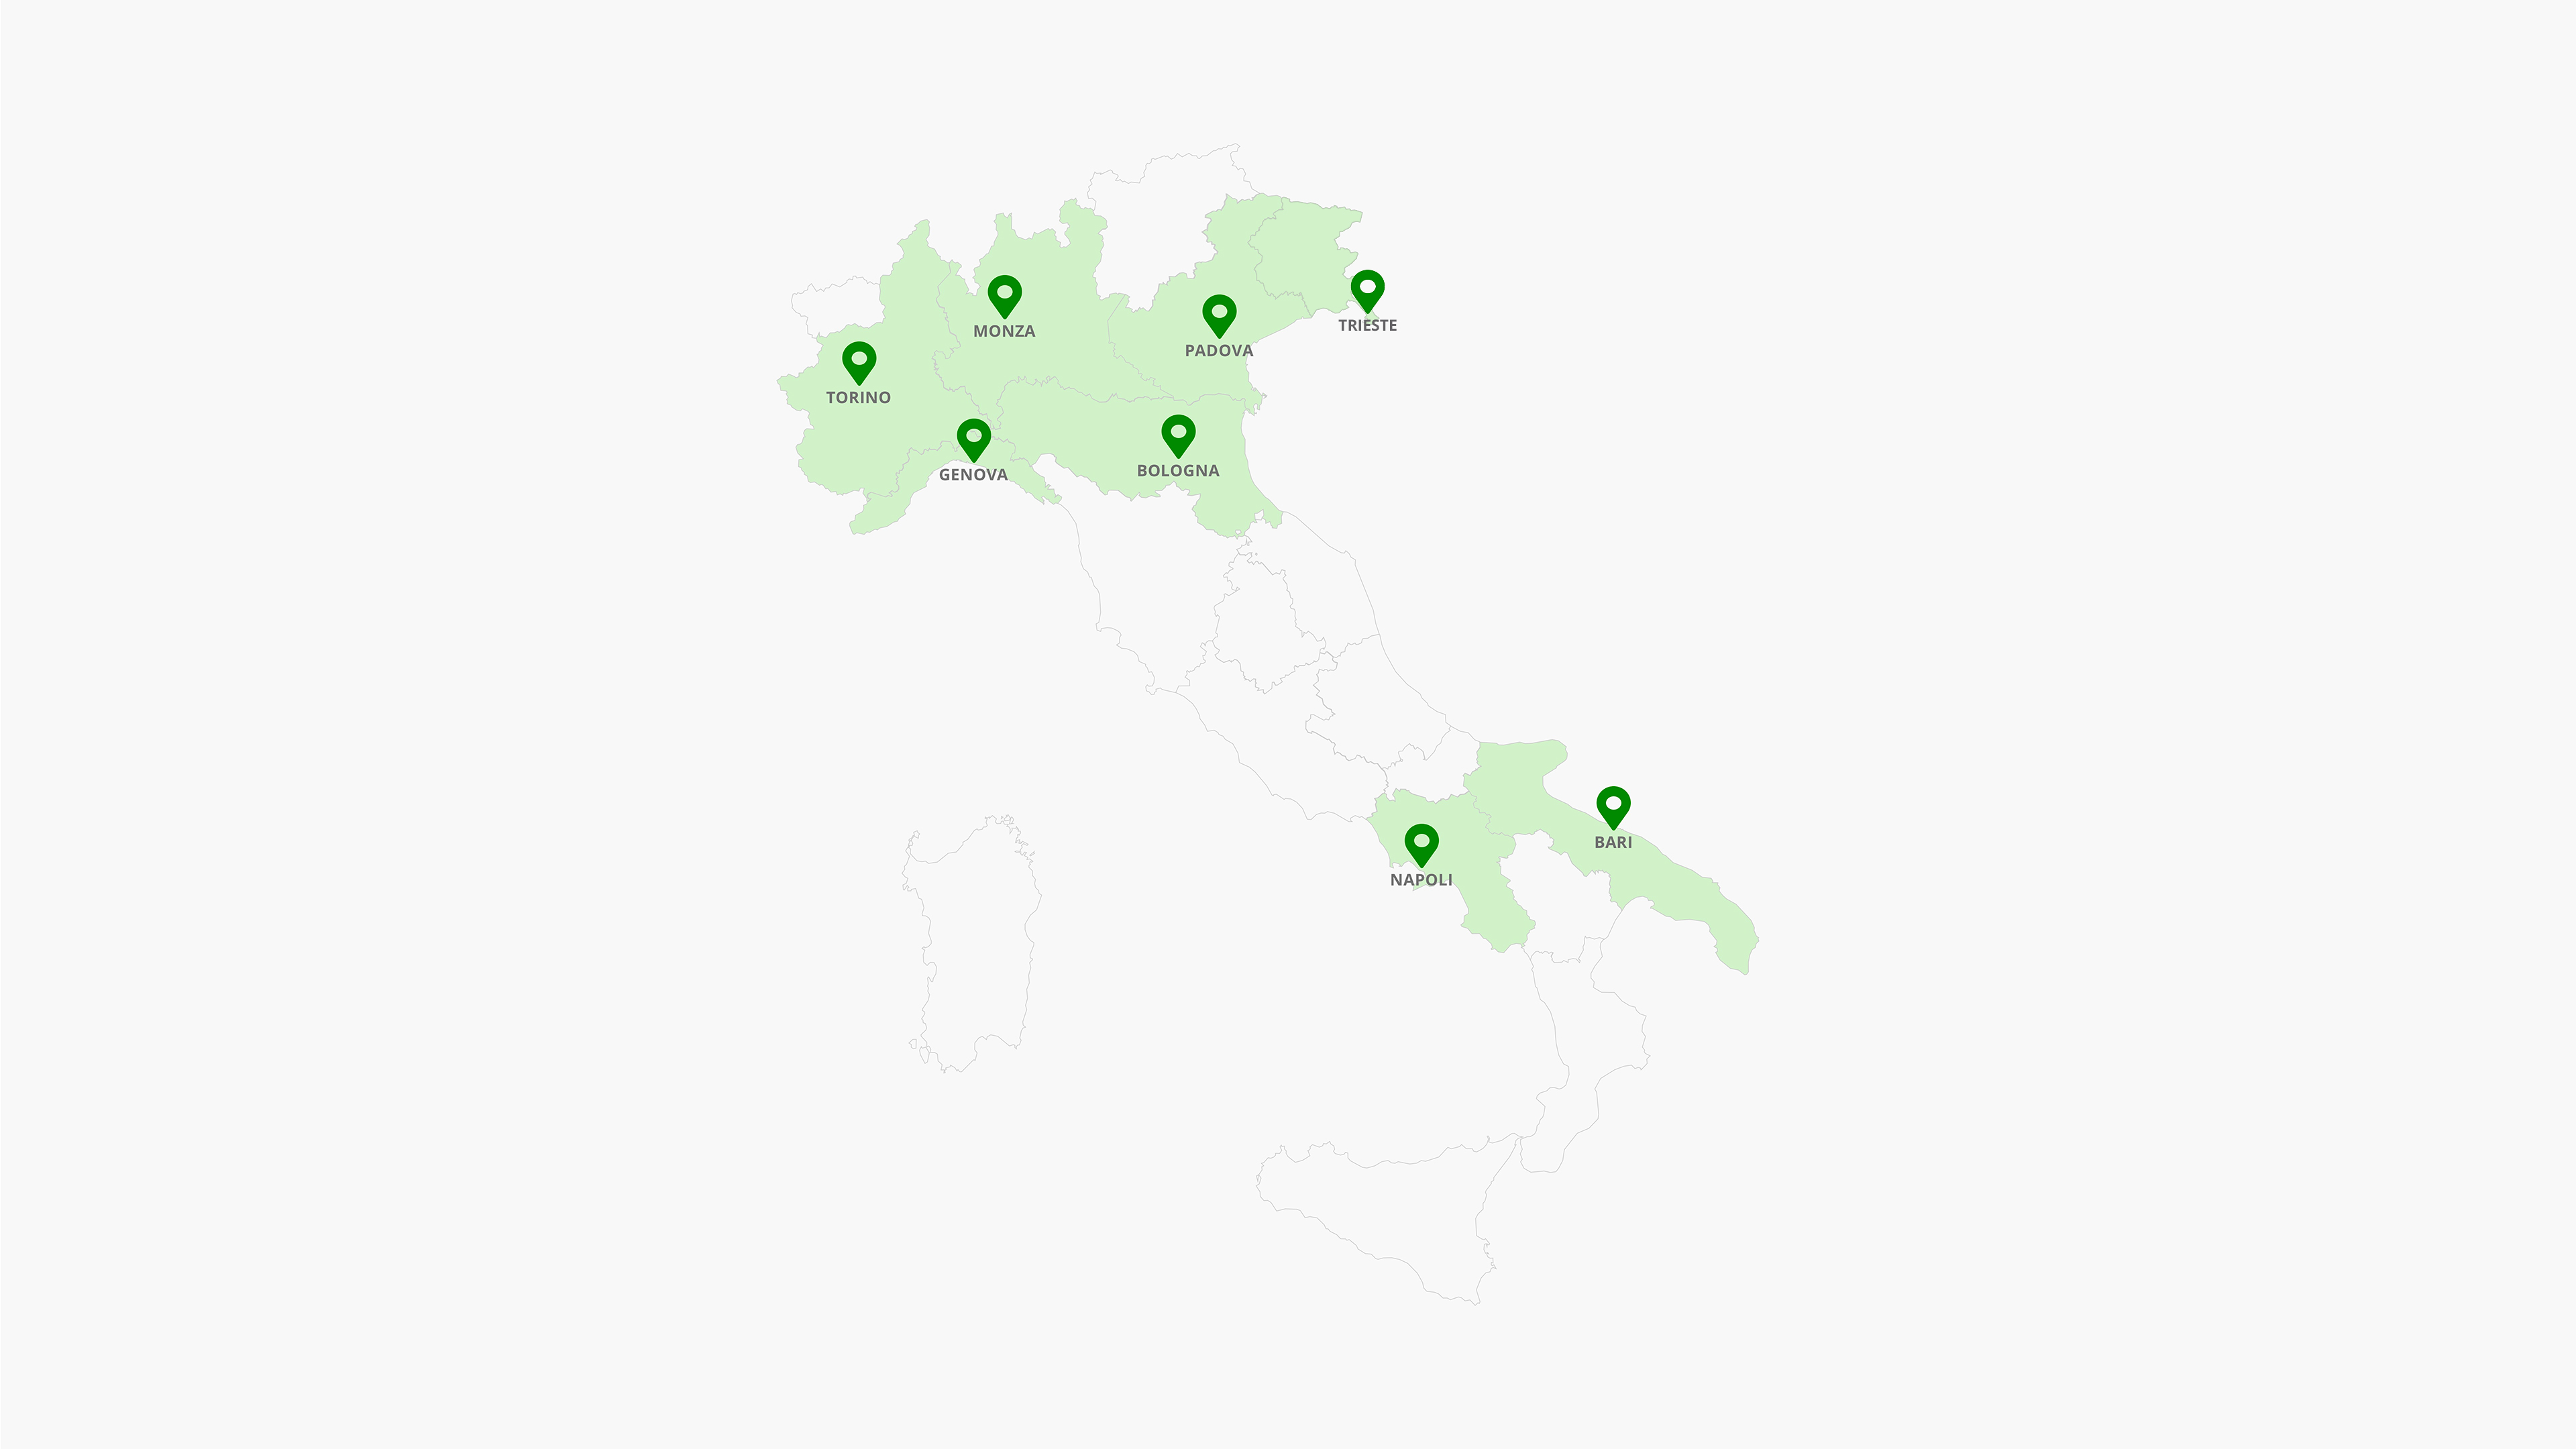 The Intesa Sanpaolo educational programme for long-suffering children is running in Turin, Naples, Monza, Padua, Bologna, Genoa Bari and Trieste